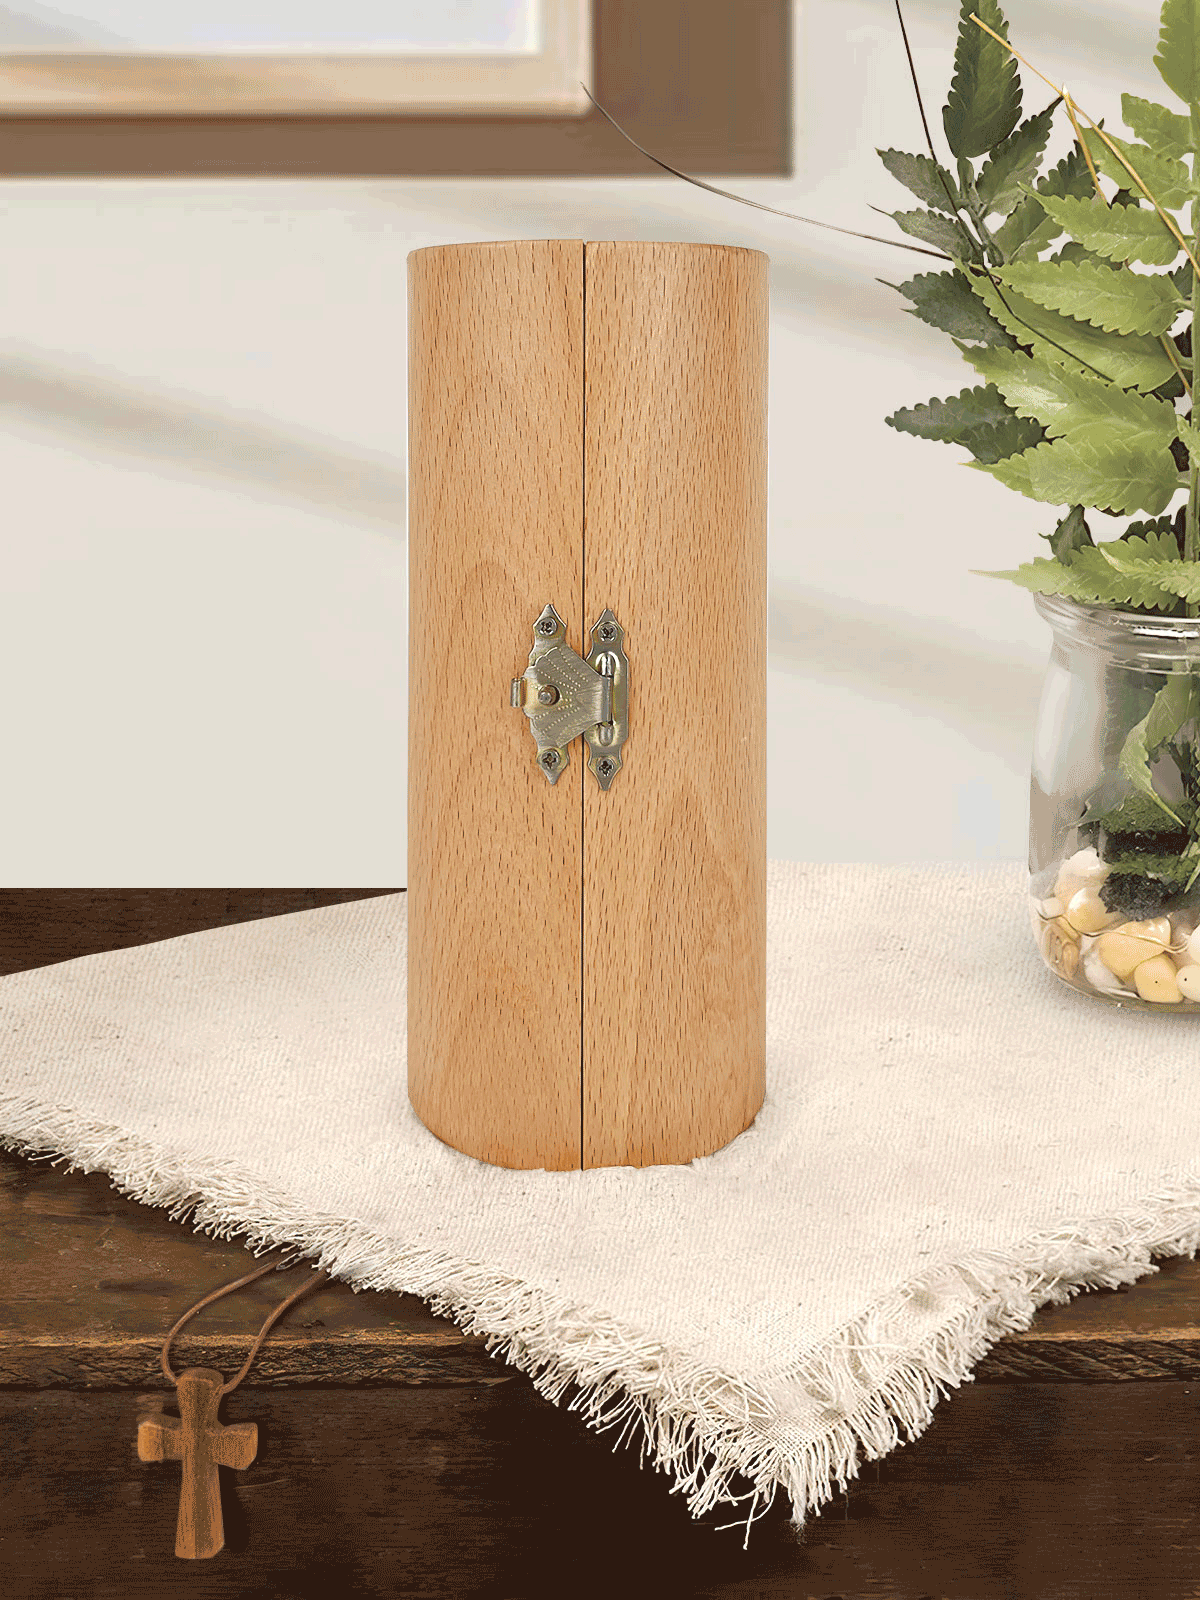 The Lord's Prayer - Openable Wooden Cylinder Sculpture of Jesus Christ